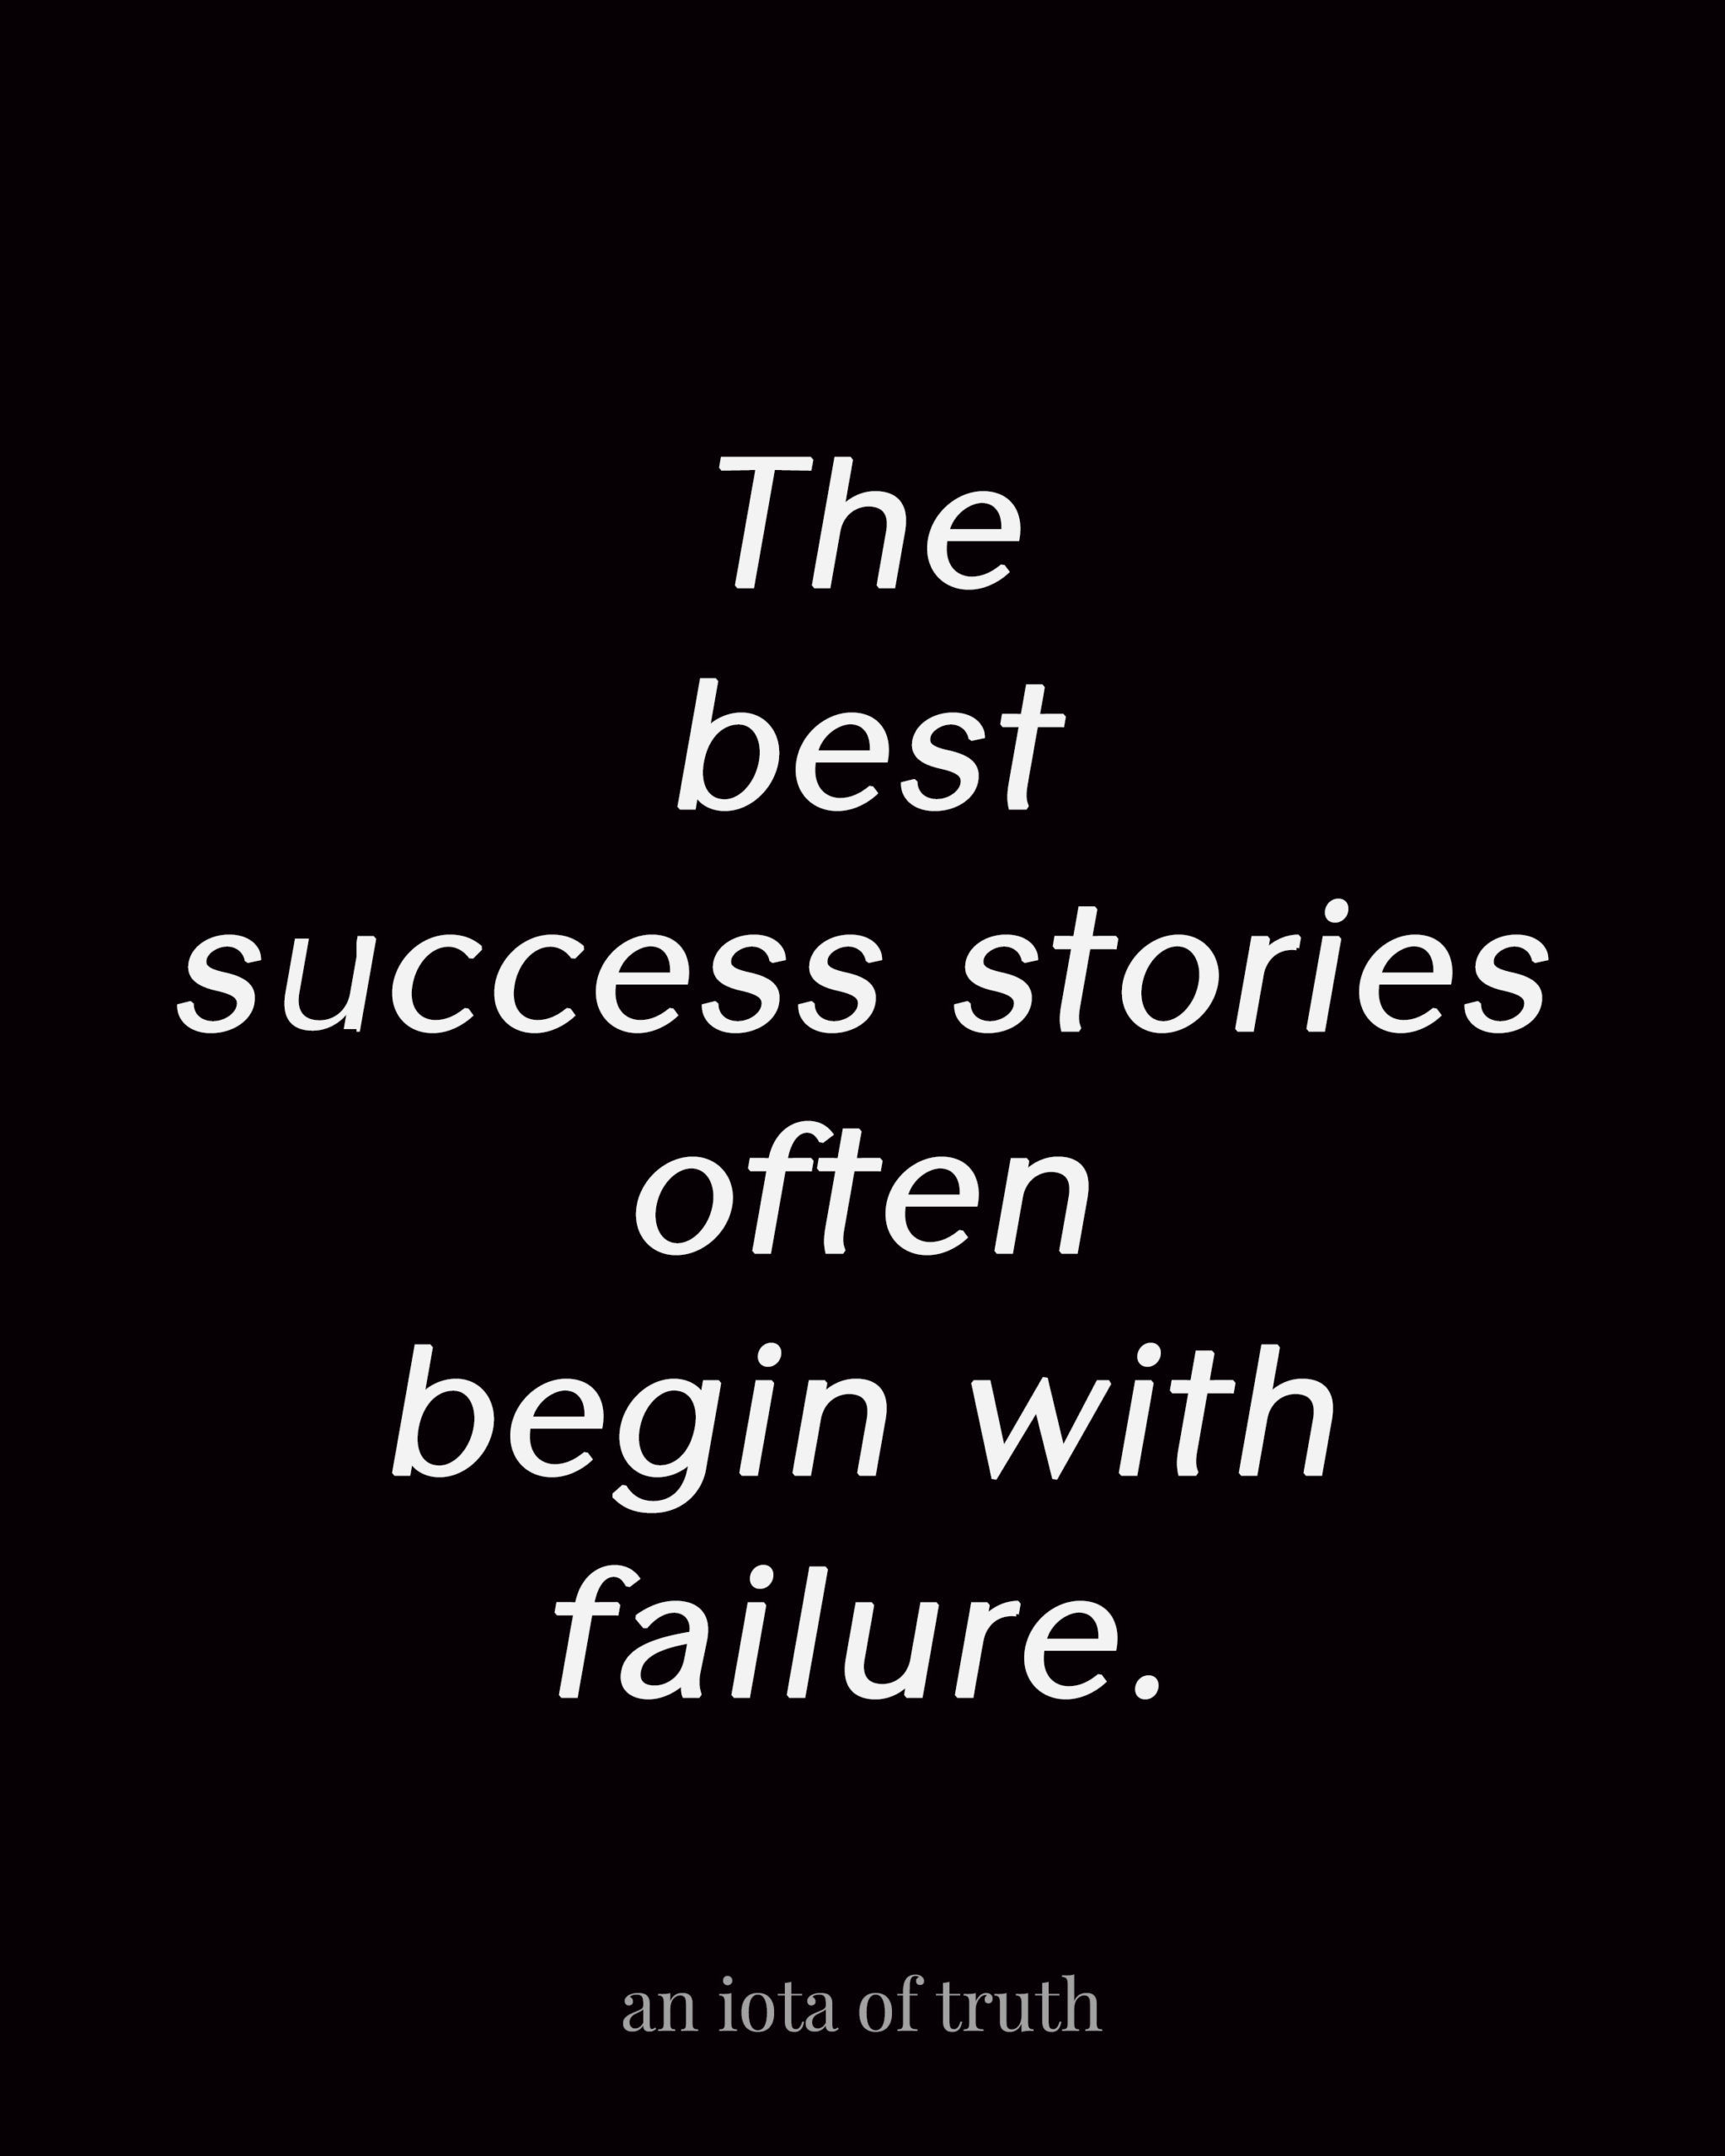 The best success stories often begin with failure.